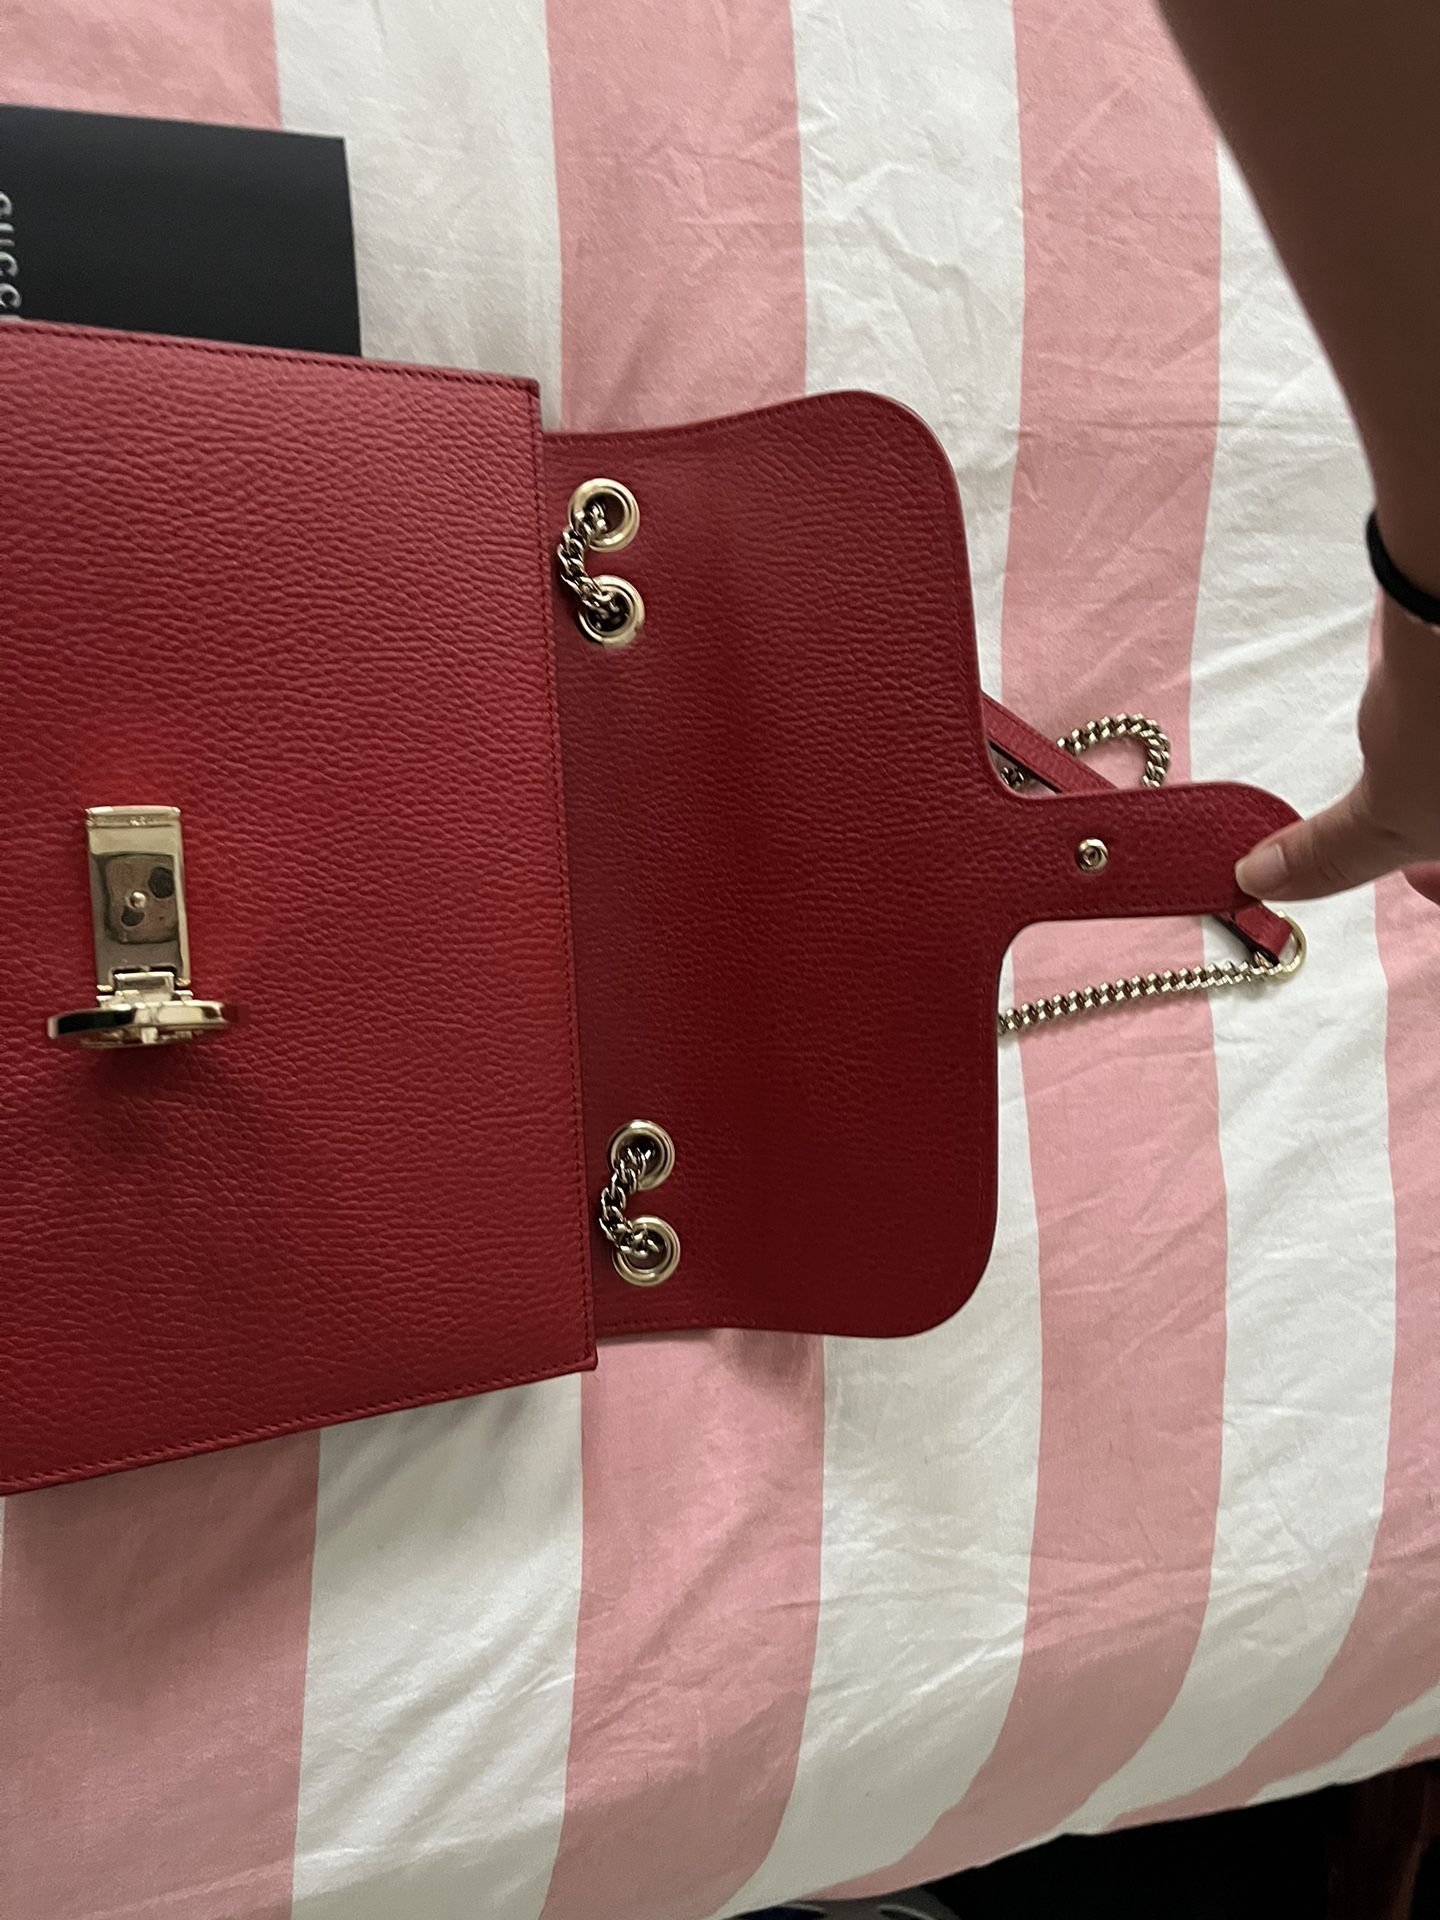 Brand New Never Used Gucci Red Leather Bag